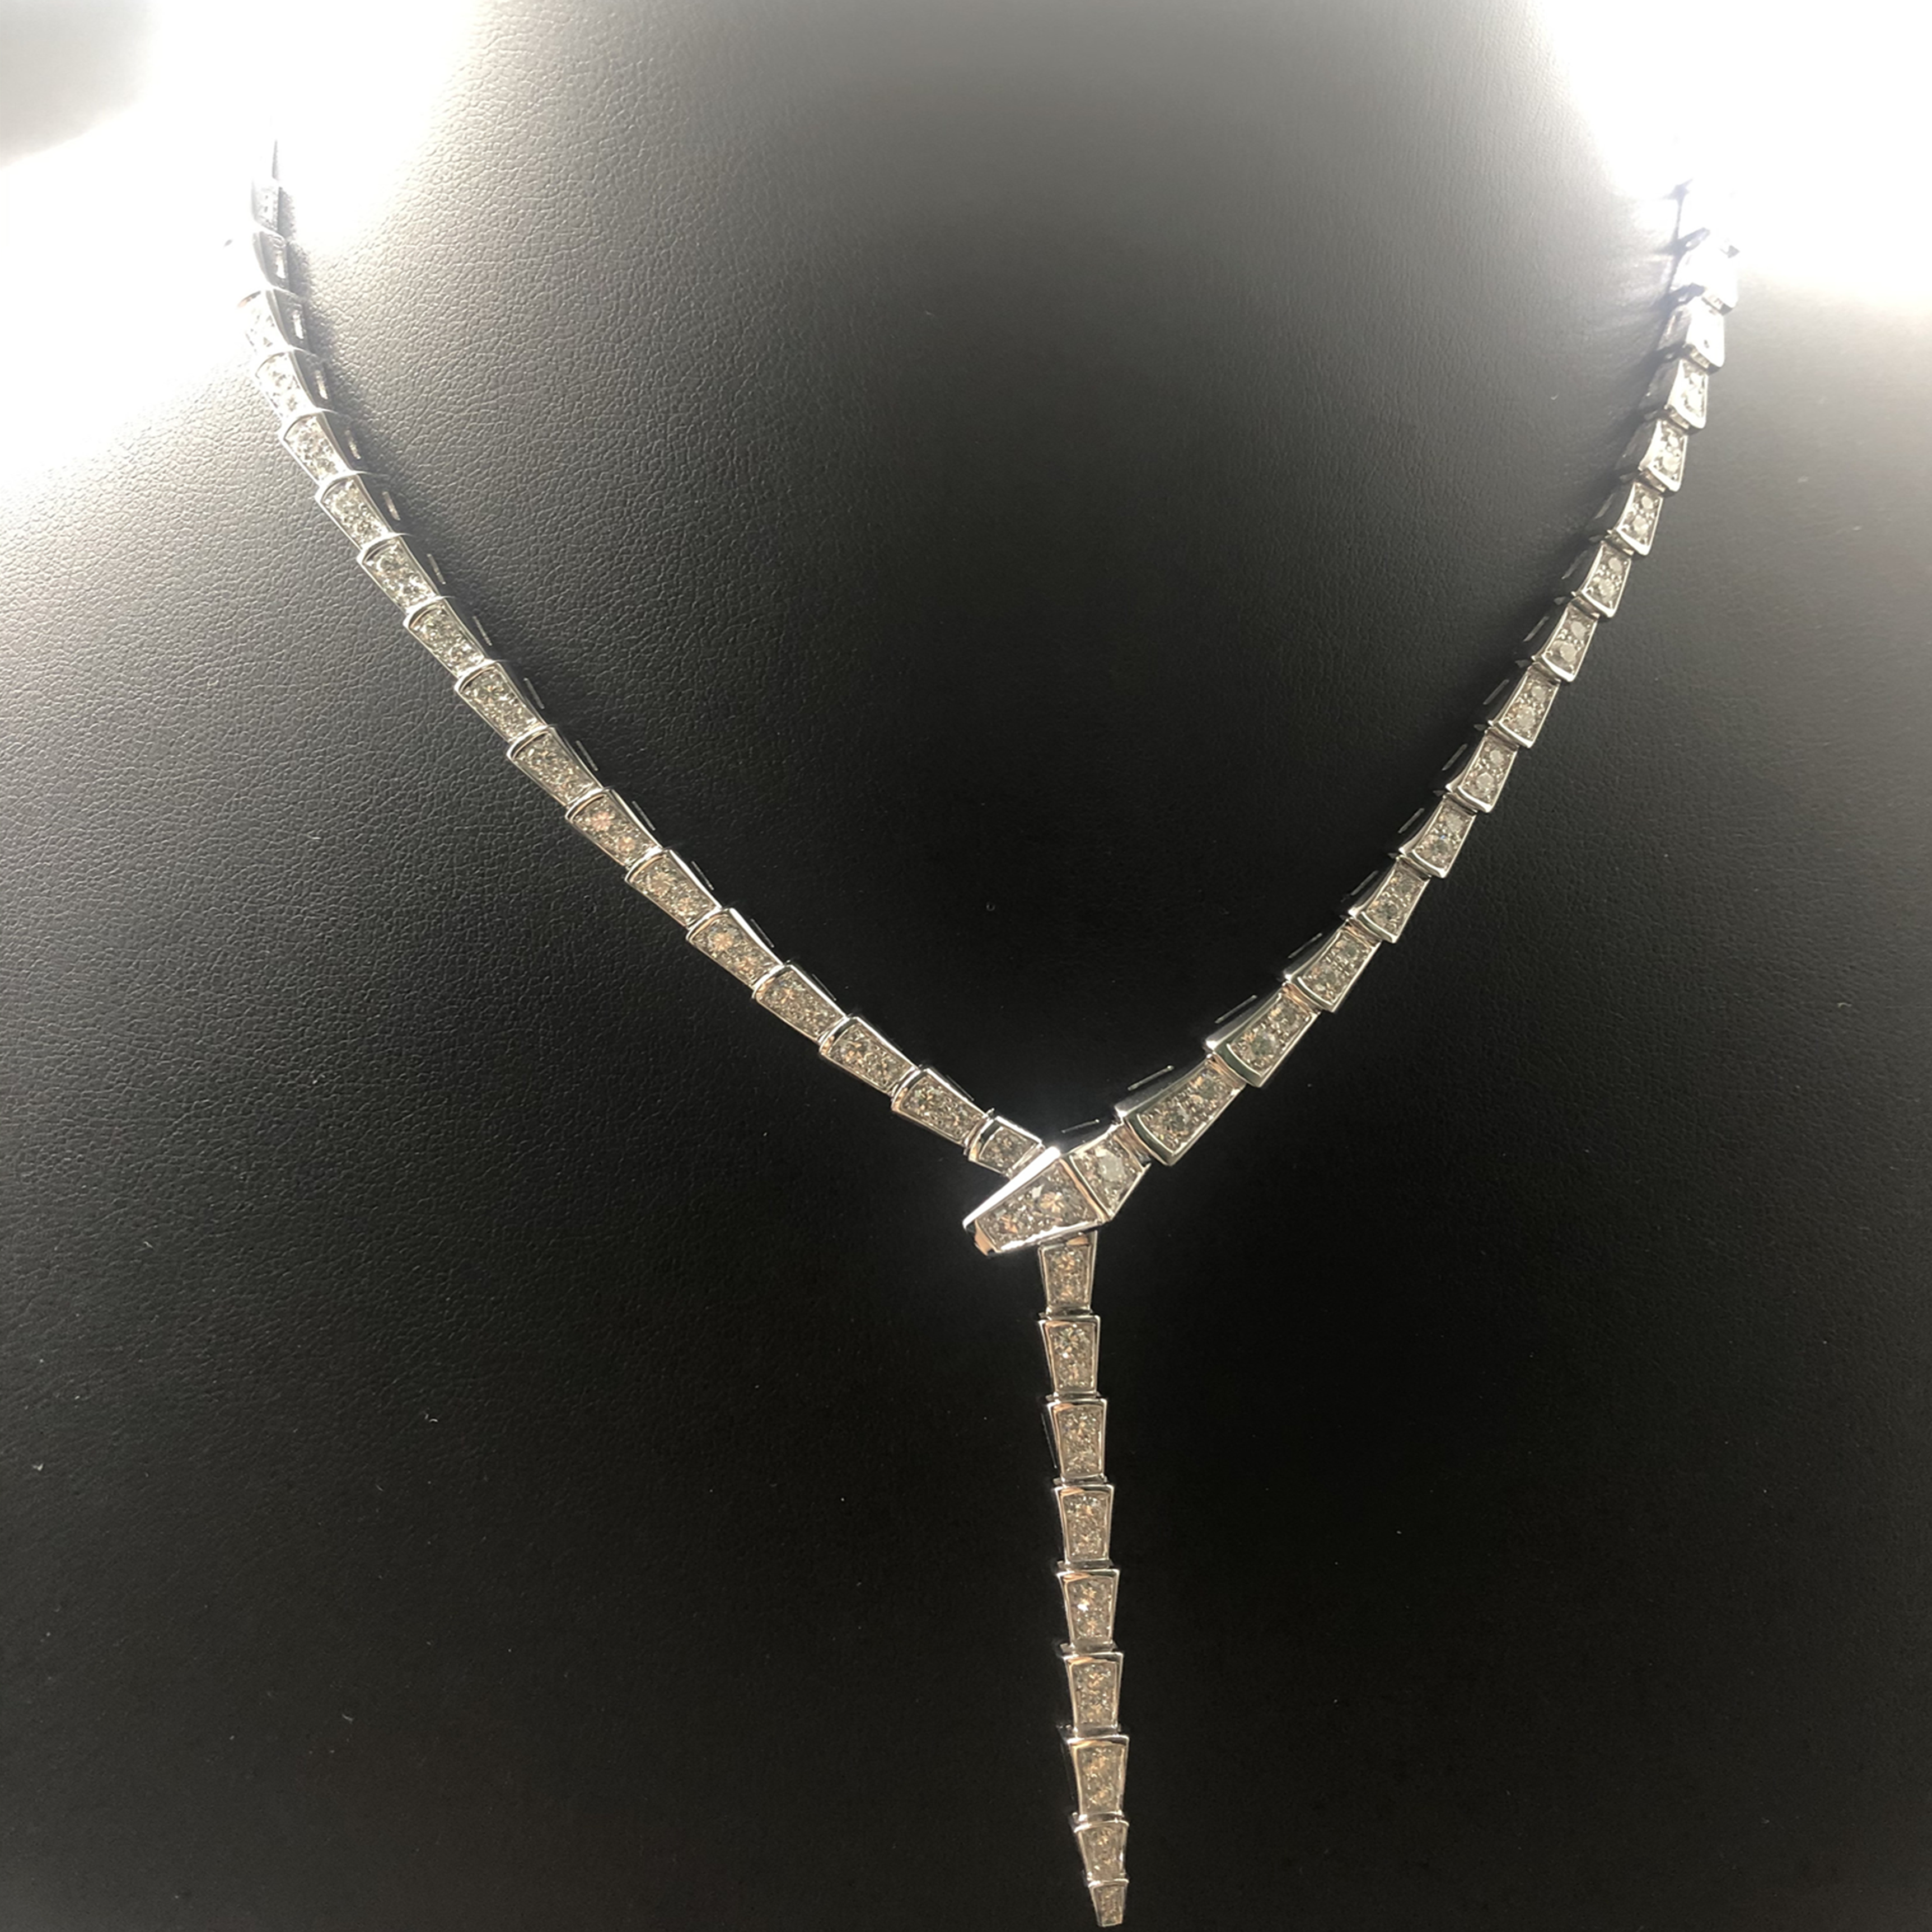 Custom Made Bvlgari Serpenti Viper Necklace in 18K White Gold with Diamond-paved